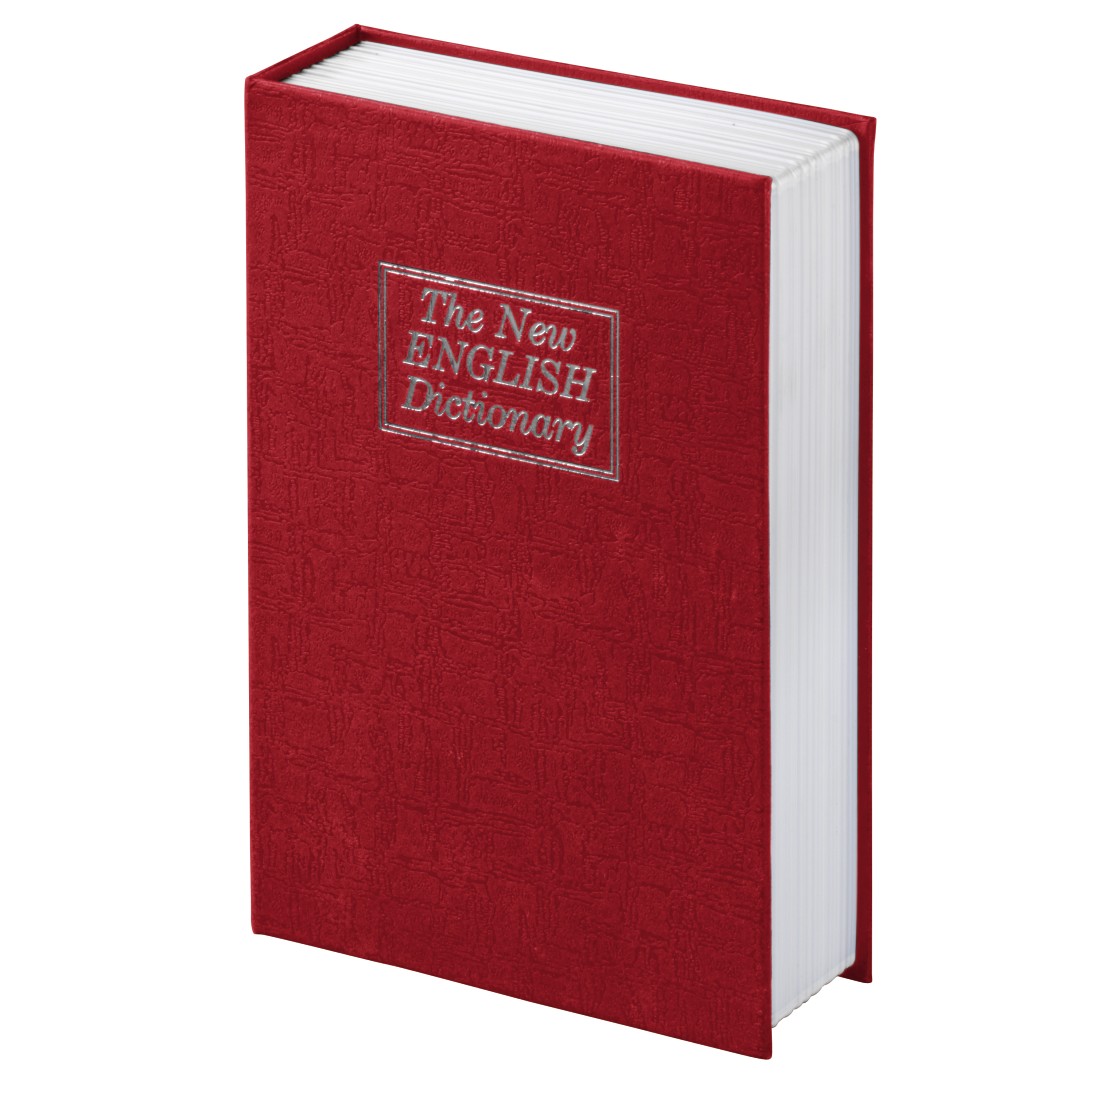 00050531 Hama "BS-180" Book Safe, design: The New English Dictionary, red